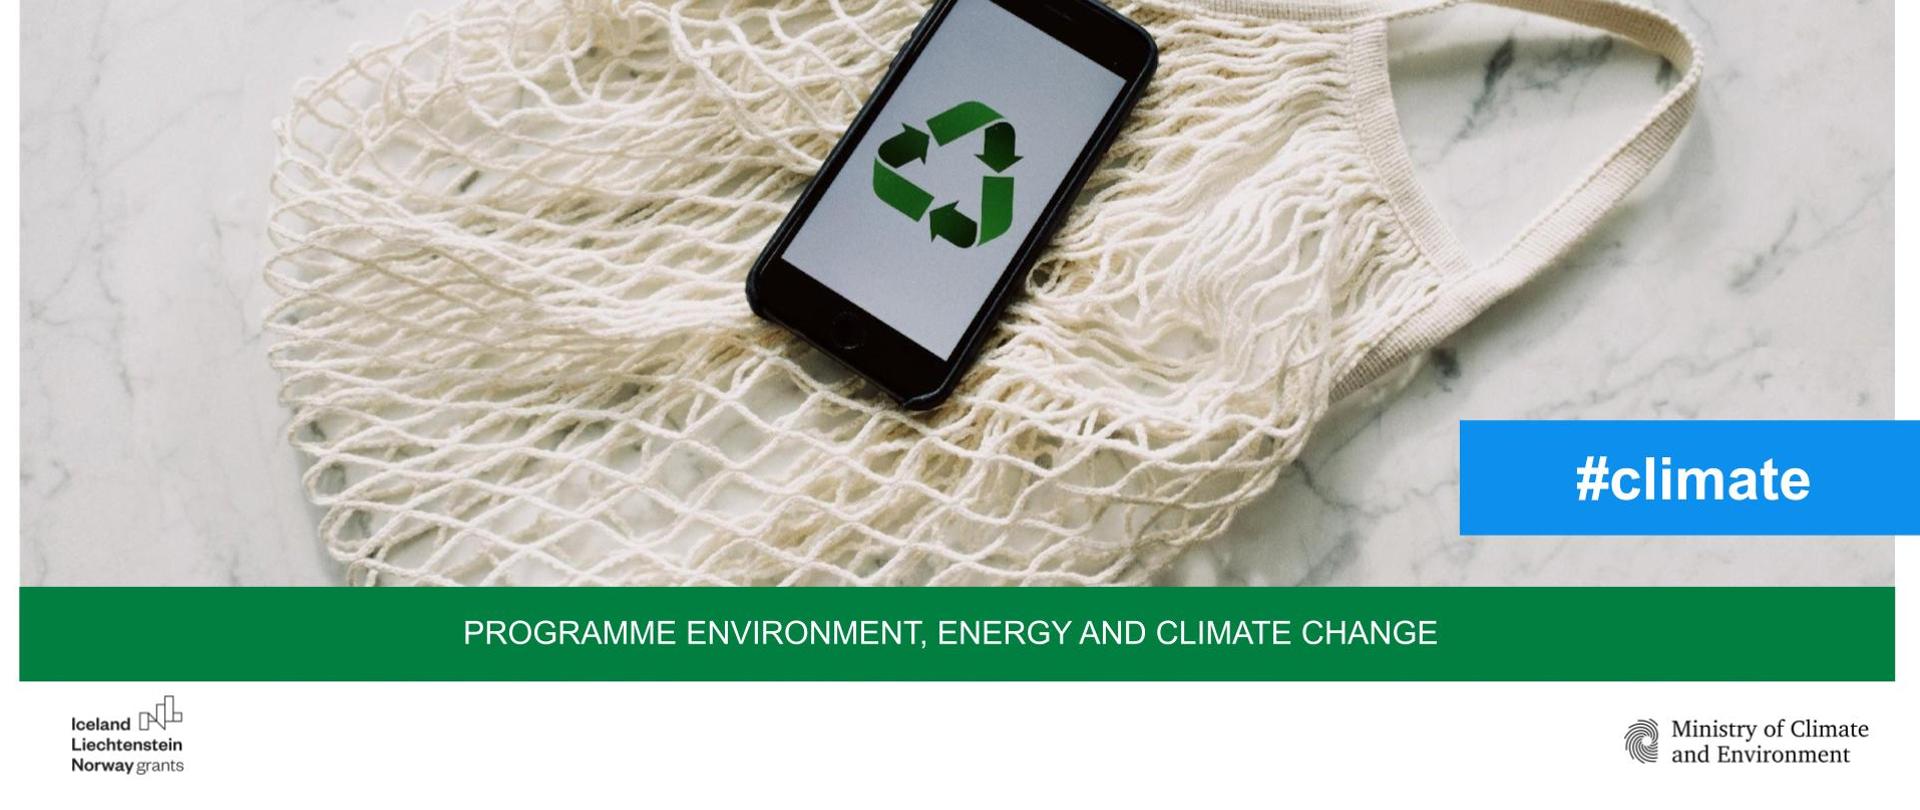 Environment,_Energy_and_Climate_Change_Programme_-_#climate_CE